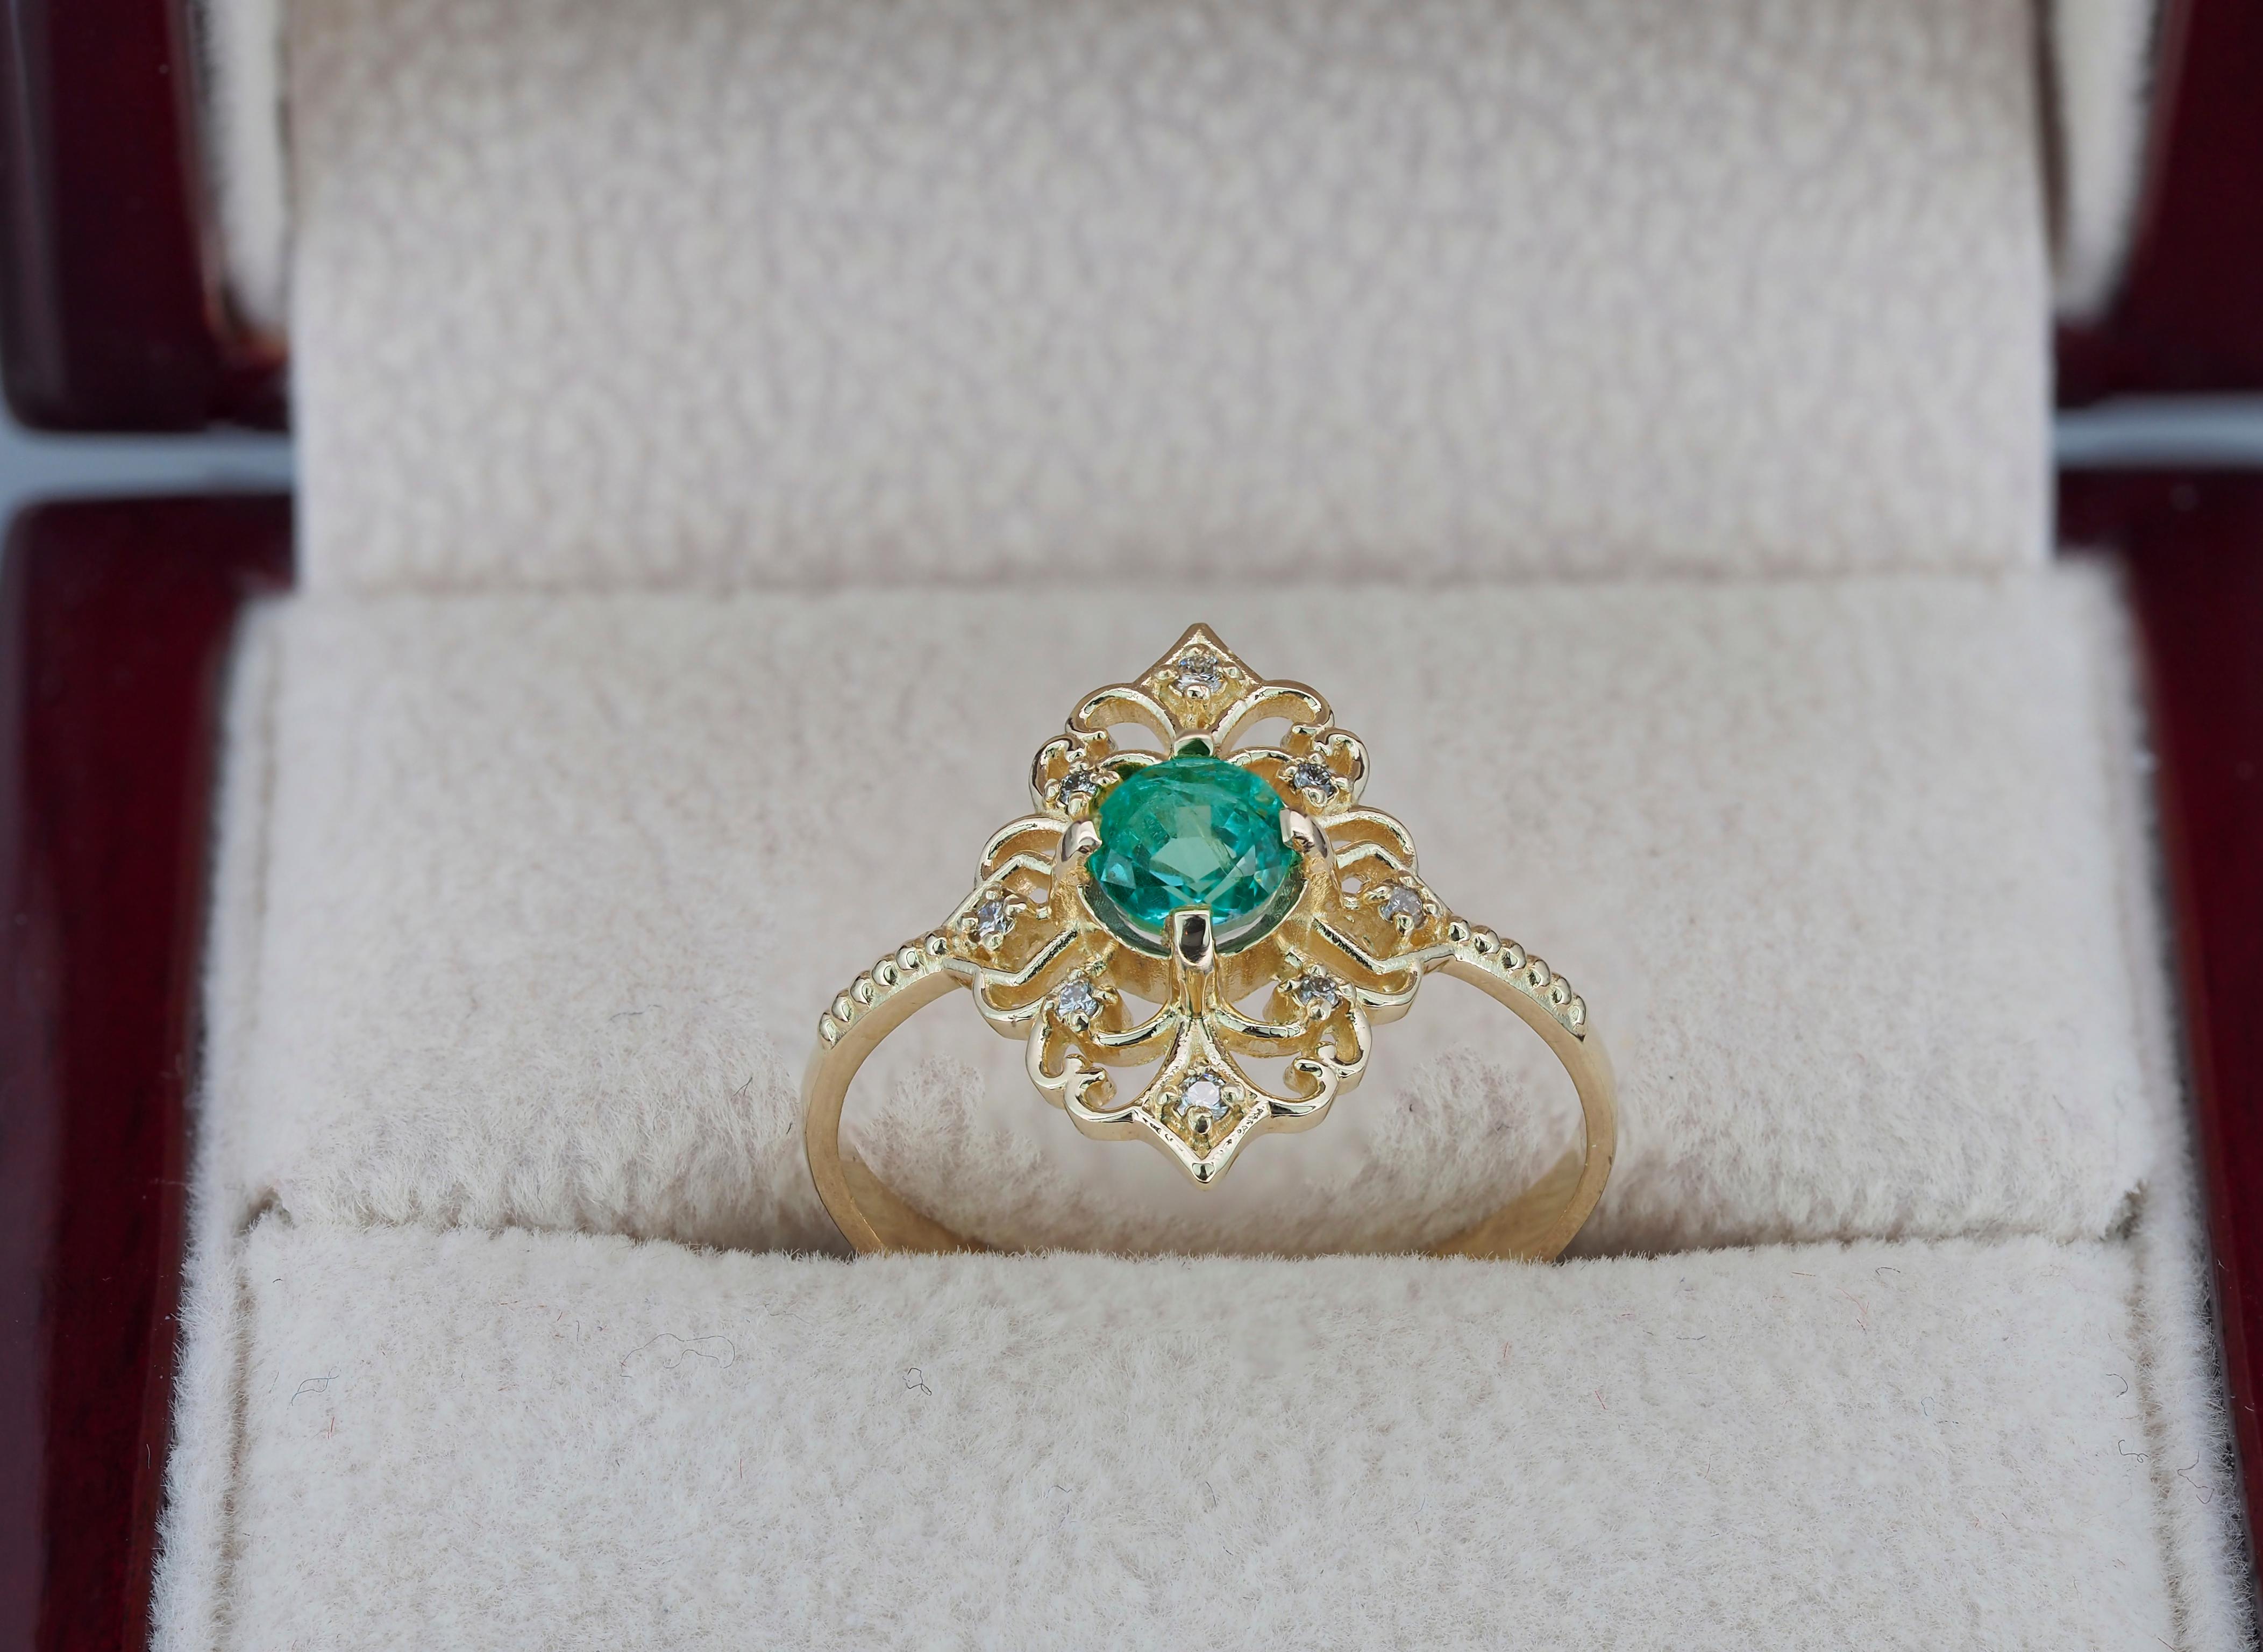 14 kt yellow gold ring with emerald and diamonds are hand made item.
Weight approx. 1.6 g.
Set with emerald, color - bluish green
Round cut, 0.50 ct. in total.
Clarity: Transparent with inclusions

Surrounding stone - diamonds 0.08 (8x0.01) ct